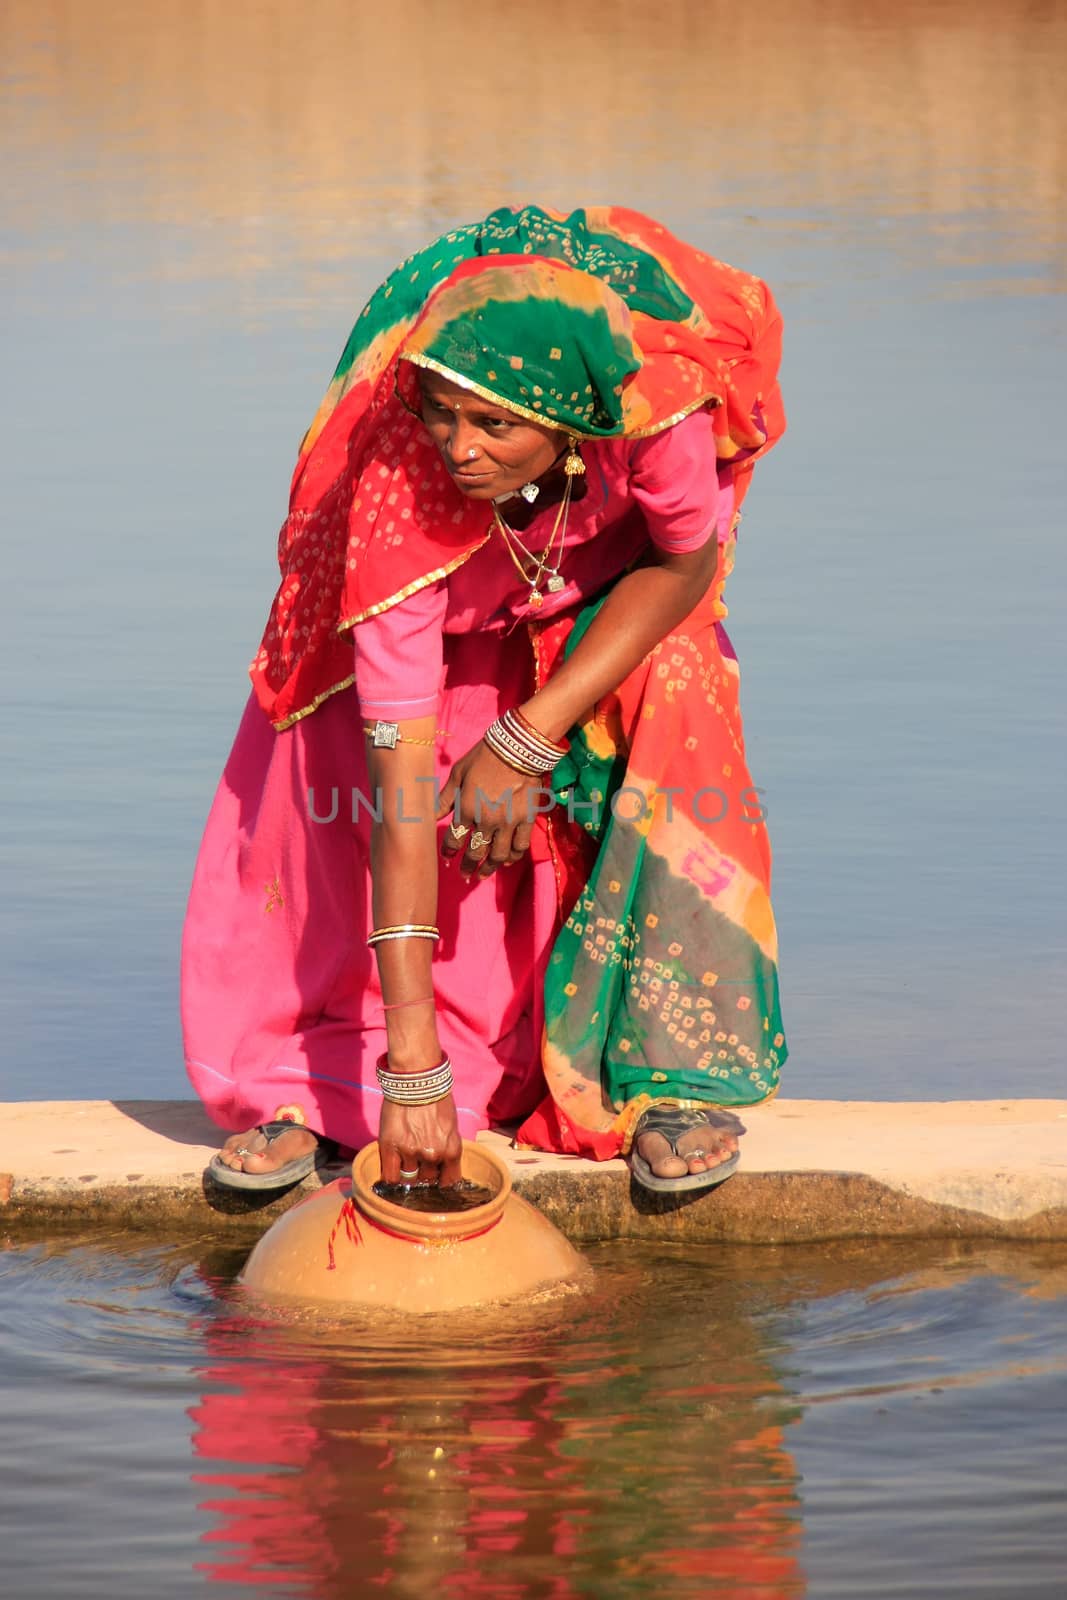 Local woman getting water from reservoir, Khichan village, Rajasthan, India